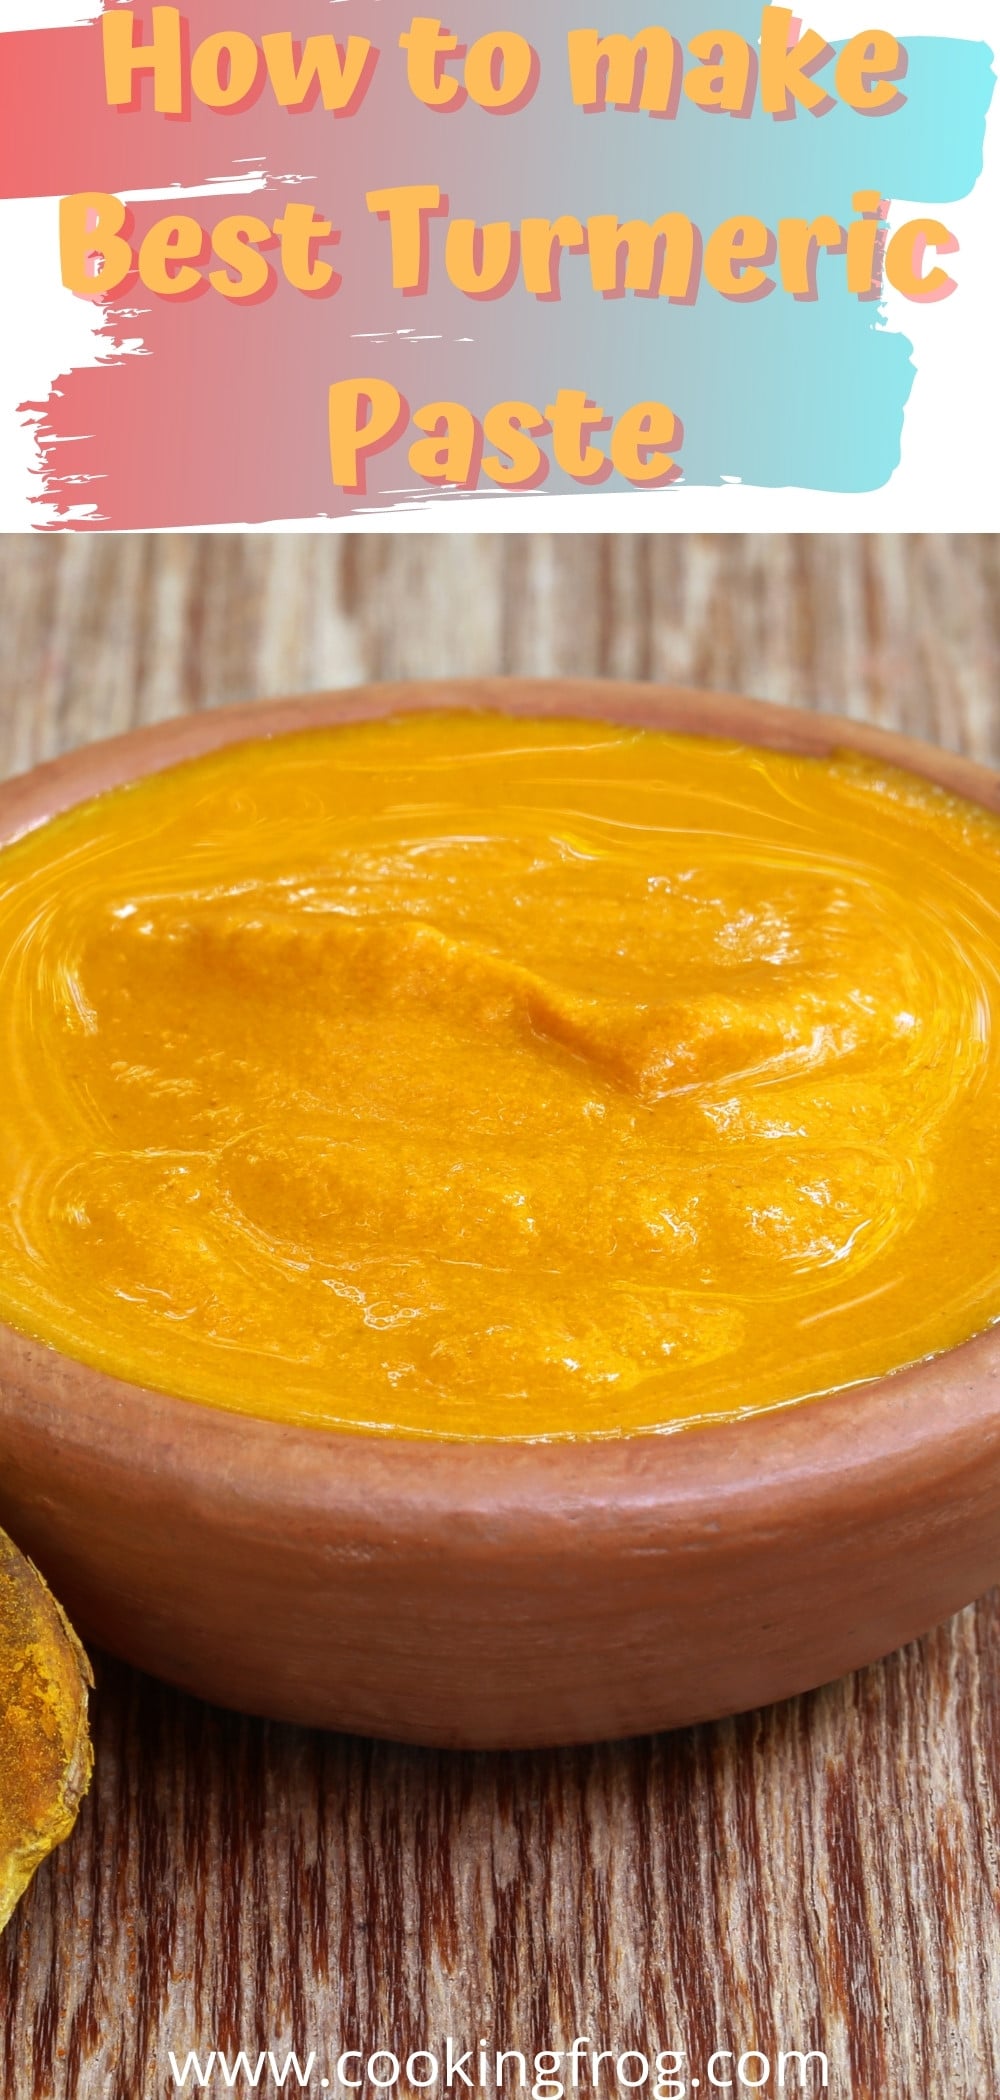 How to make Best Turmeric Paste